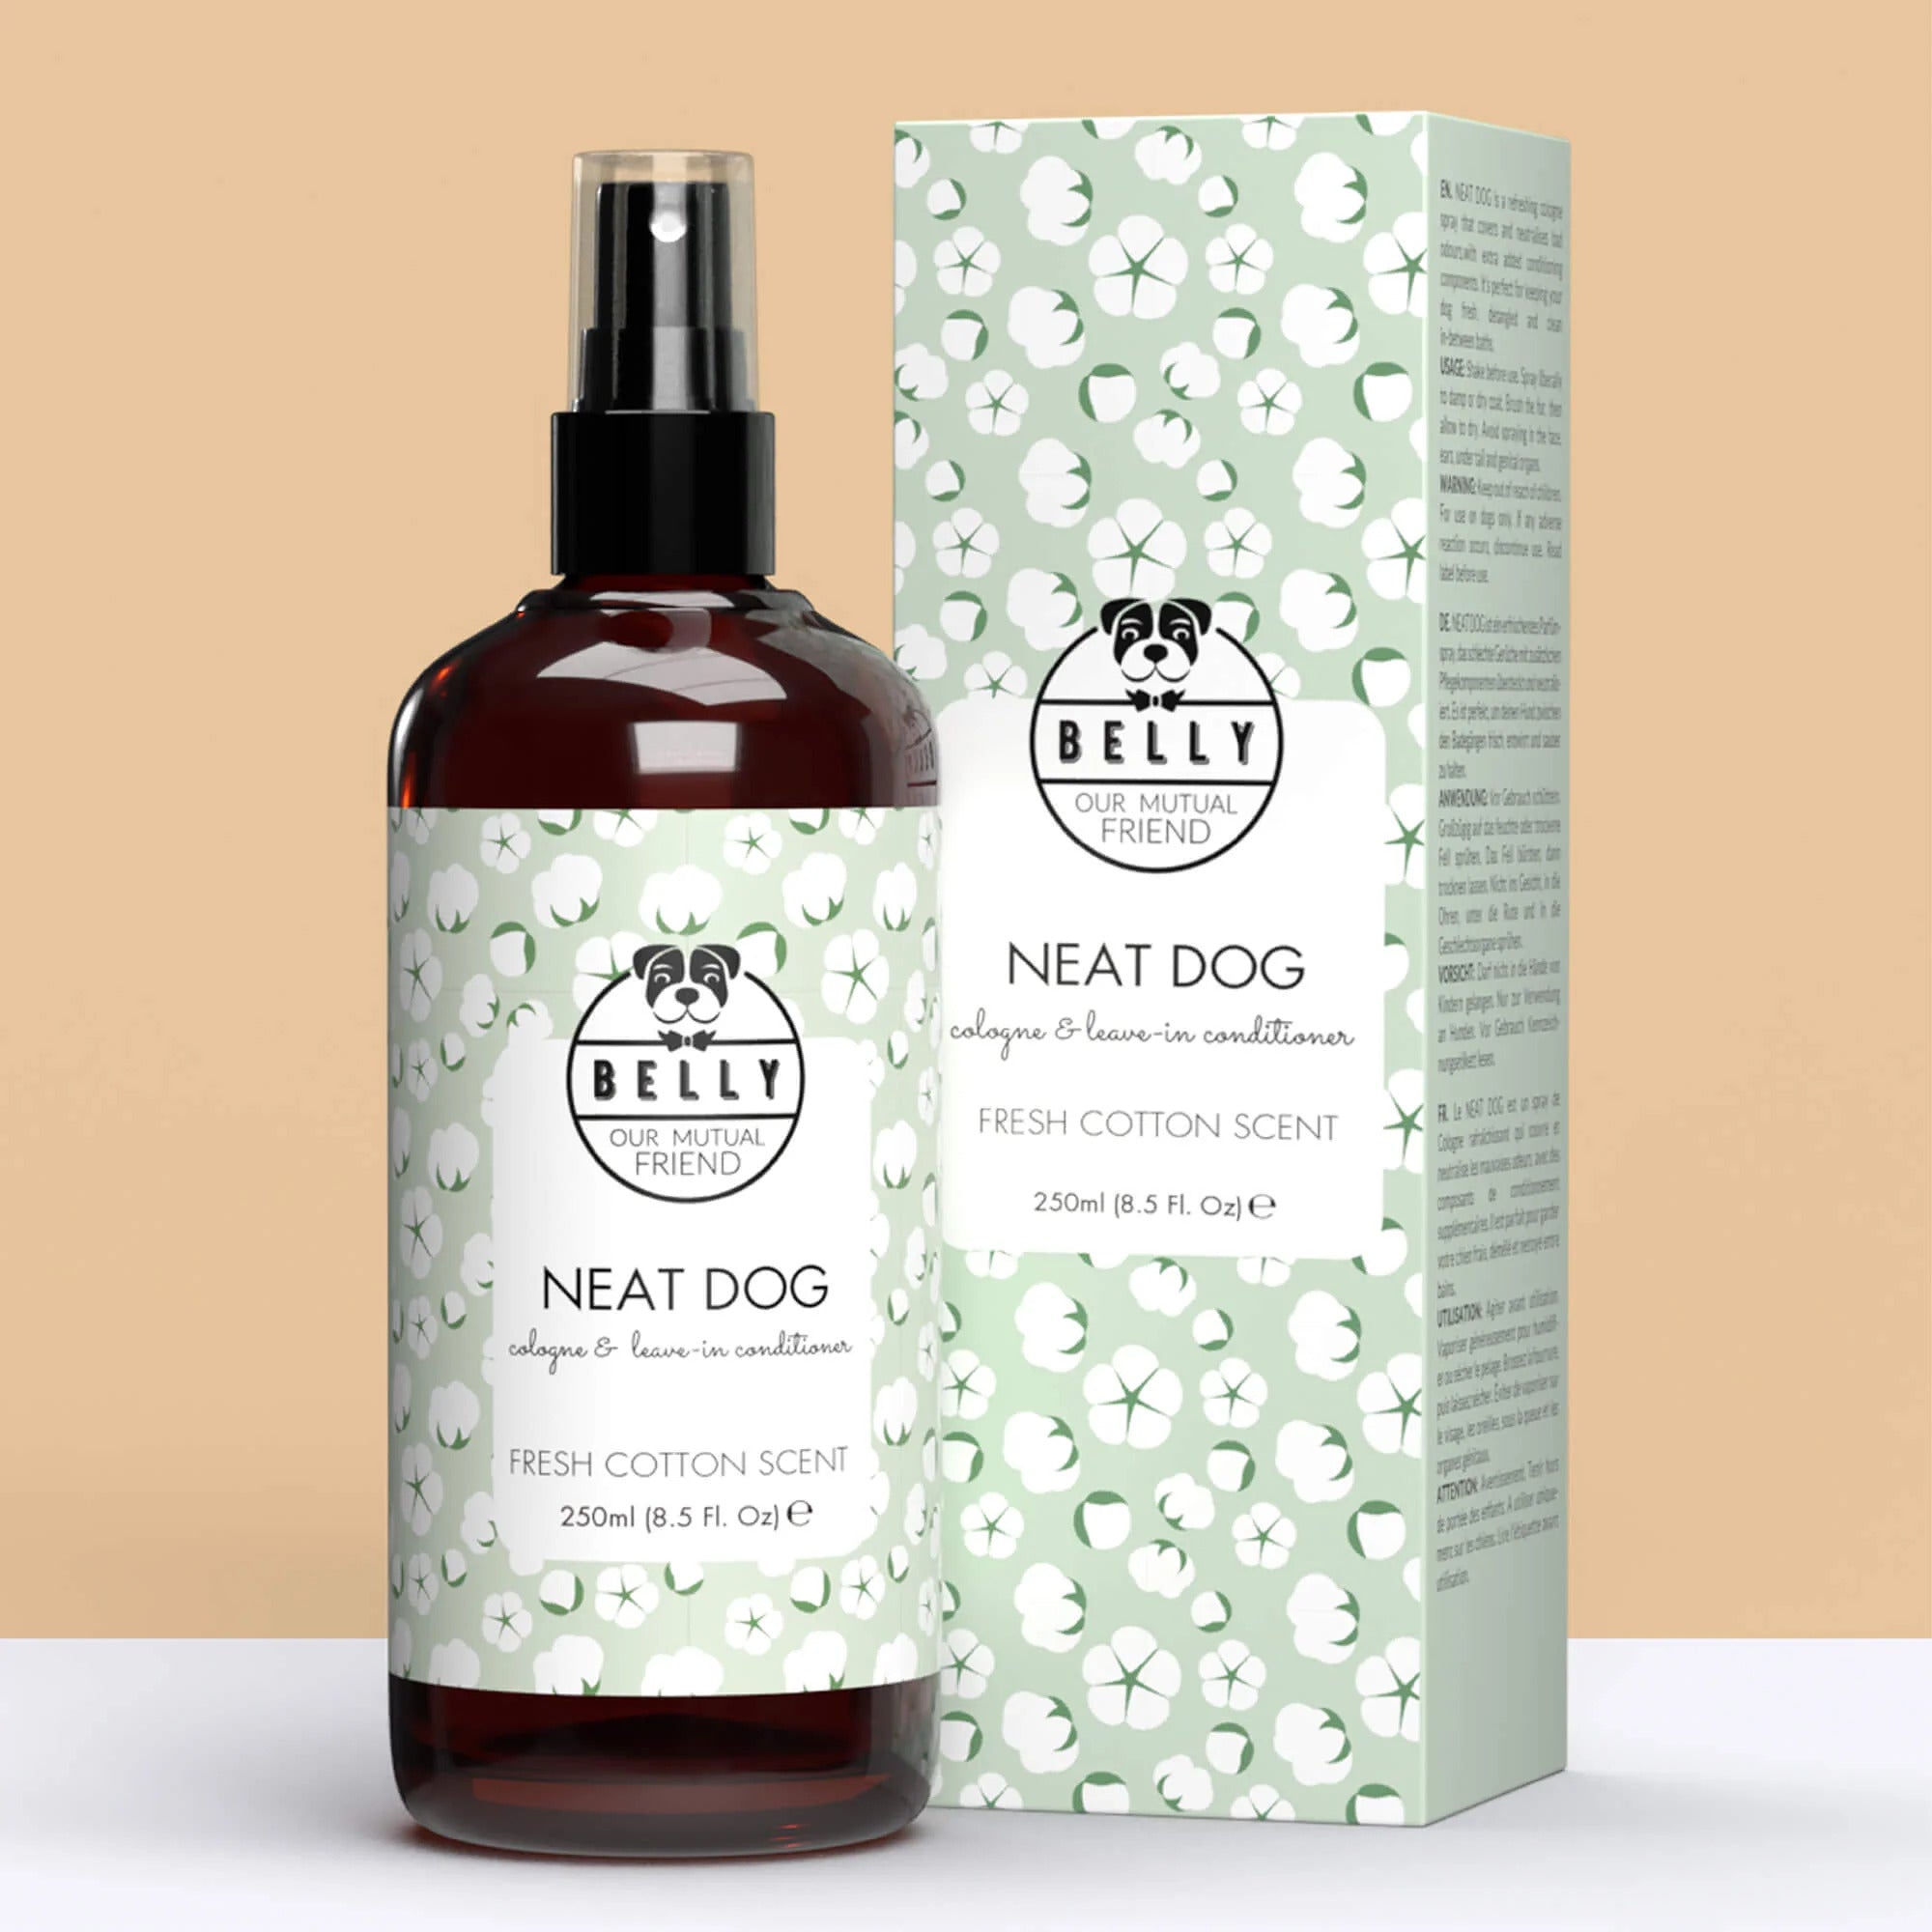 Neat Dog Fresh Cotton Cologne & leave-in Conditioner